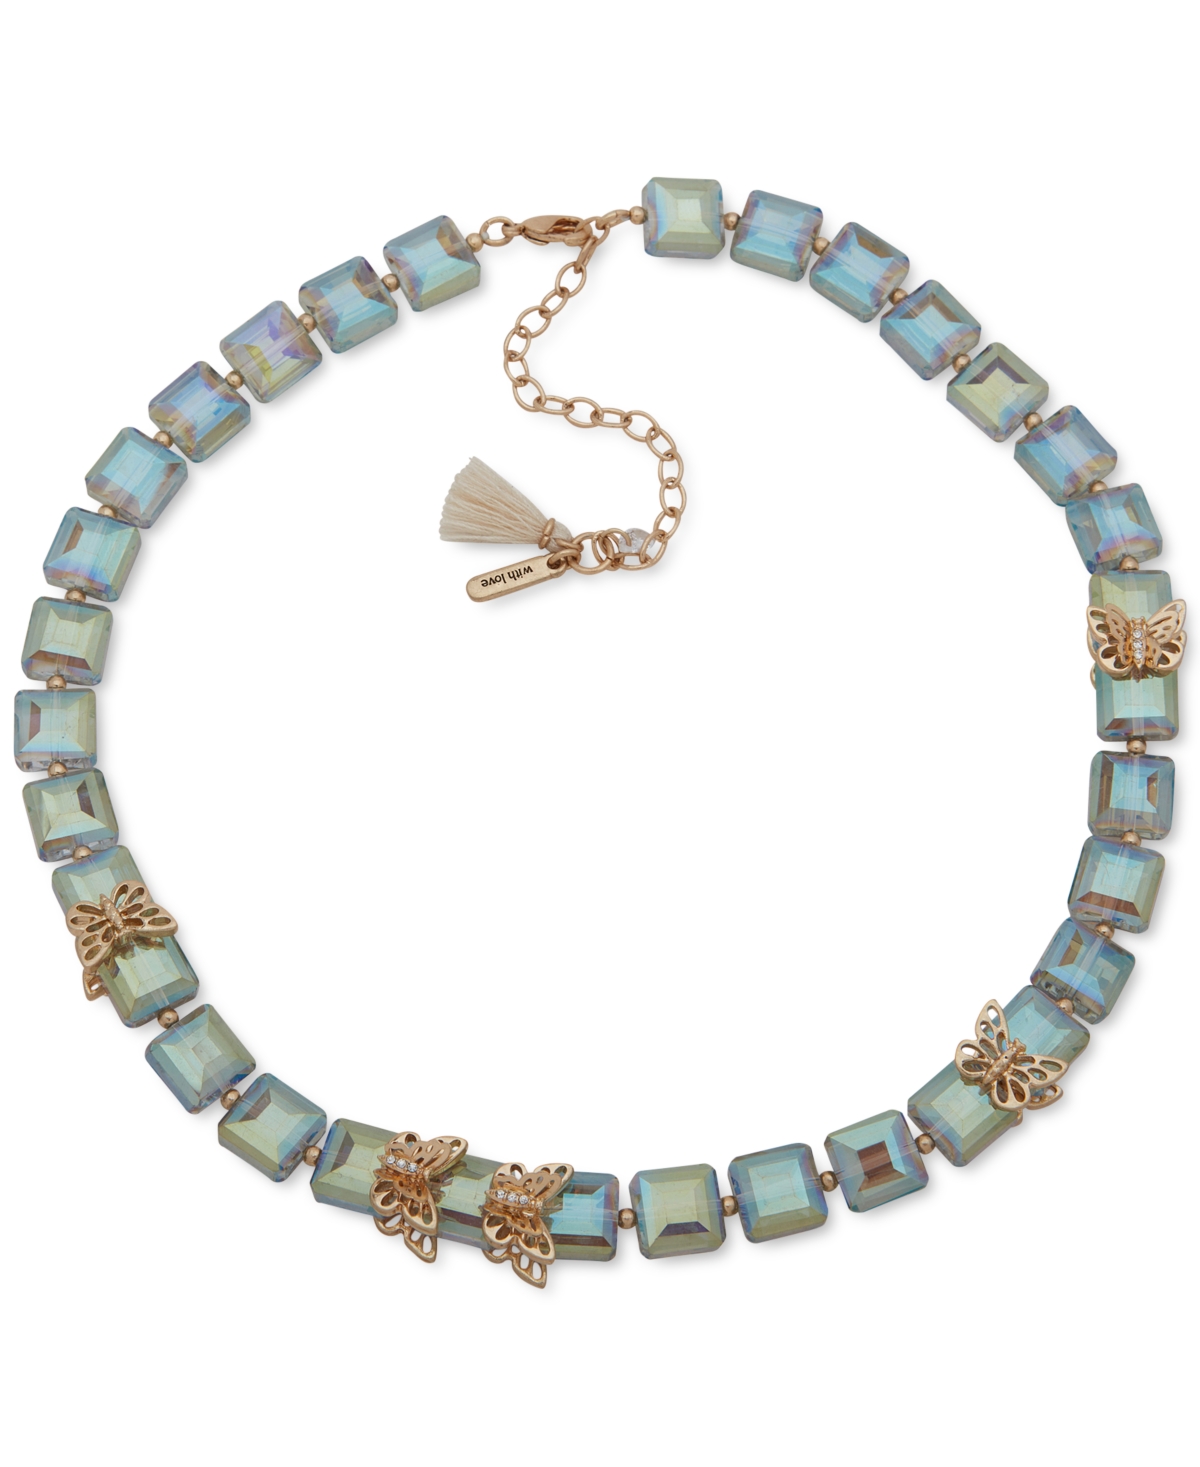 Lonna & Lilly Gold-tone Pave Butterfly & Square Stone All-around Collar Necklace, 16" + 3" Extender In Green